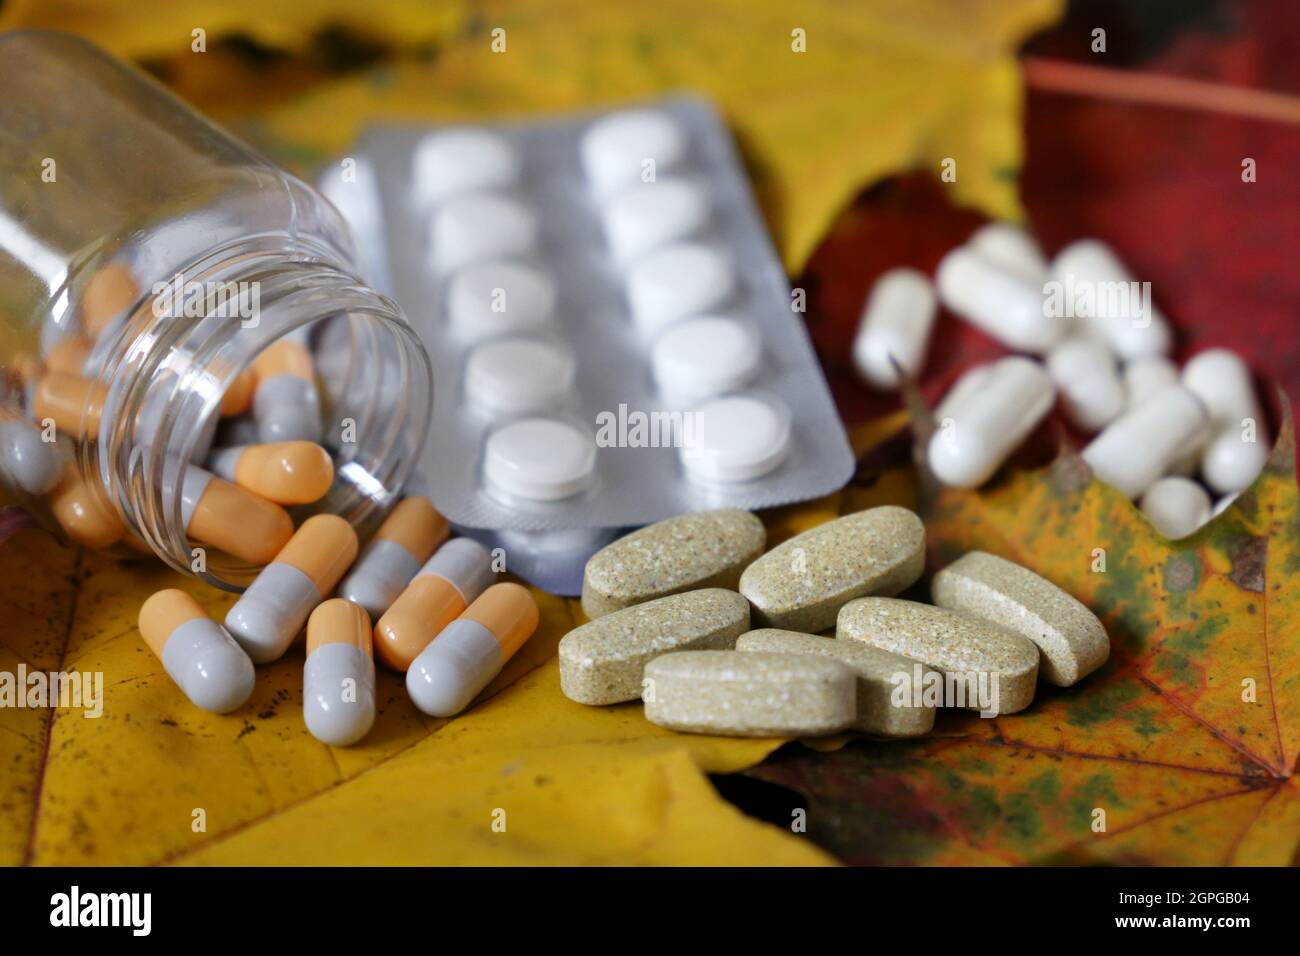 Pills on yellow maple leaves, bottle of capsules and blister packs of tablets. Concept of nutrition supplements, antidepressants, vitamins Stock Photo